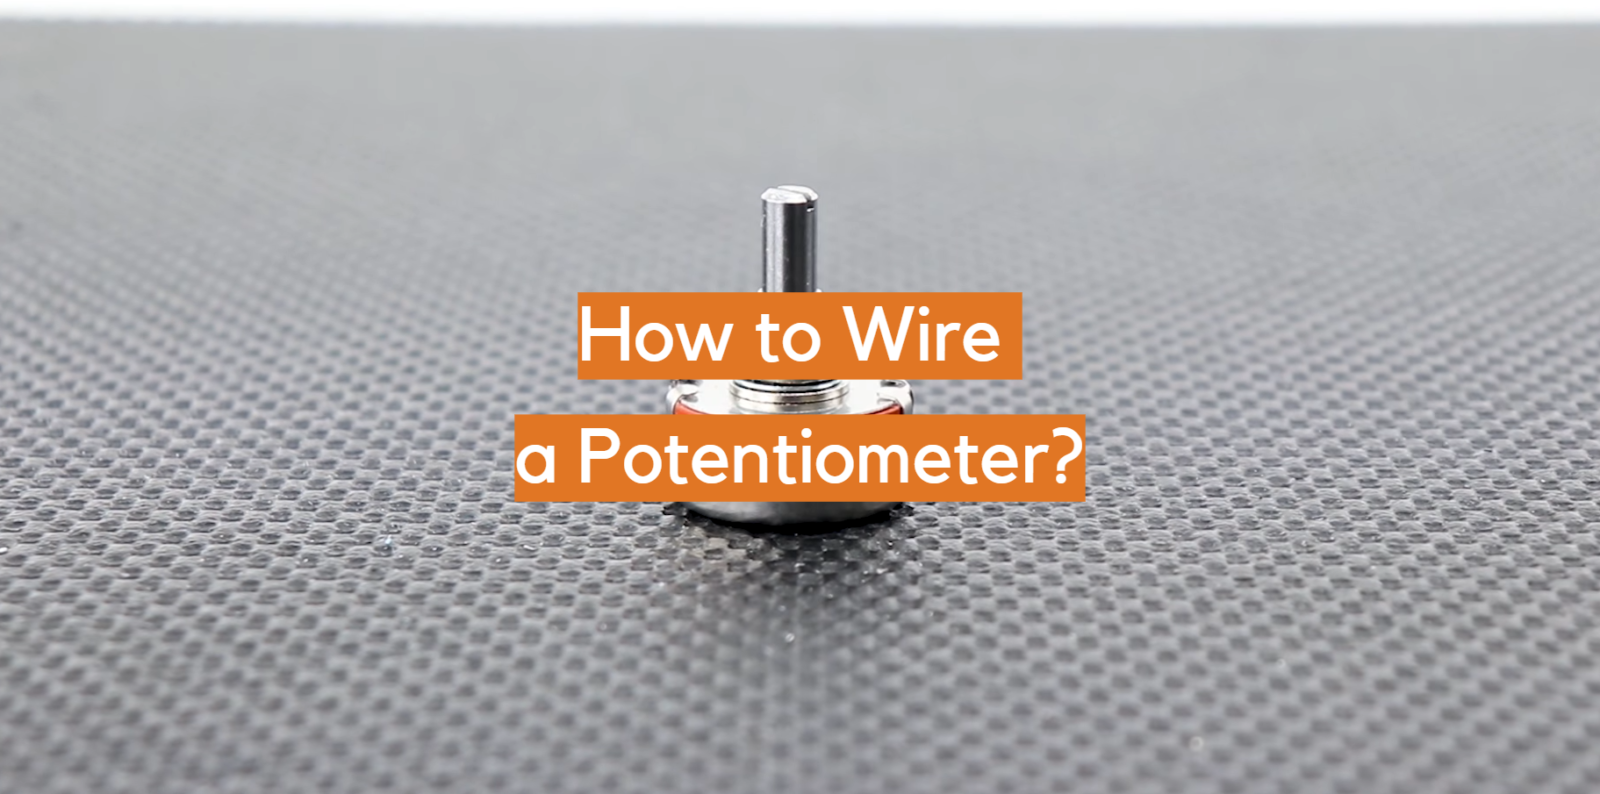 How to Wire a Potentiometer?